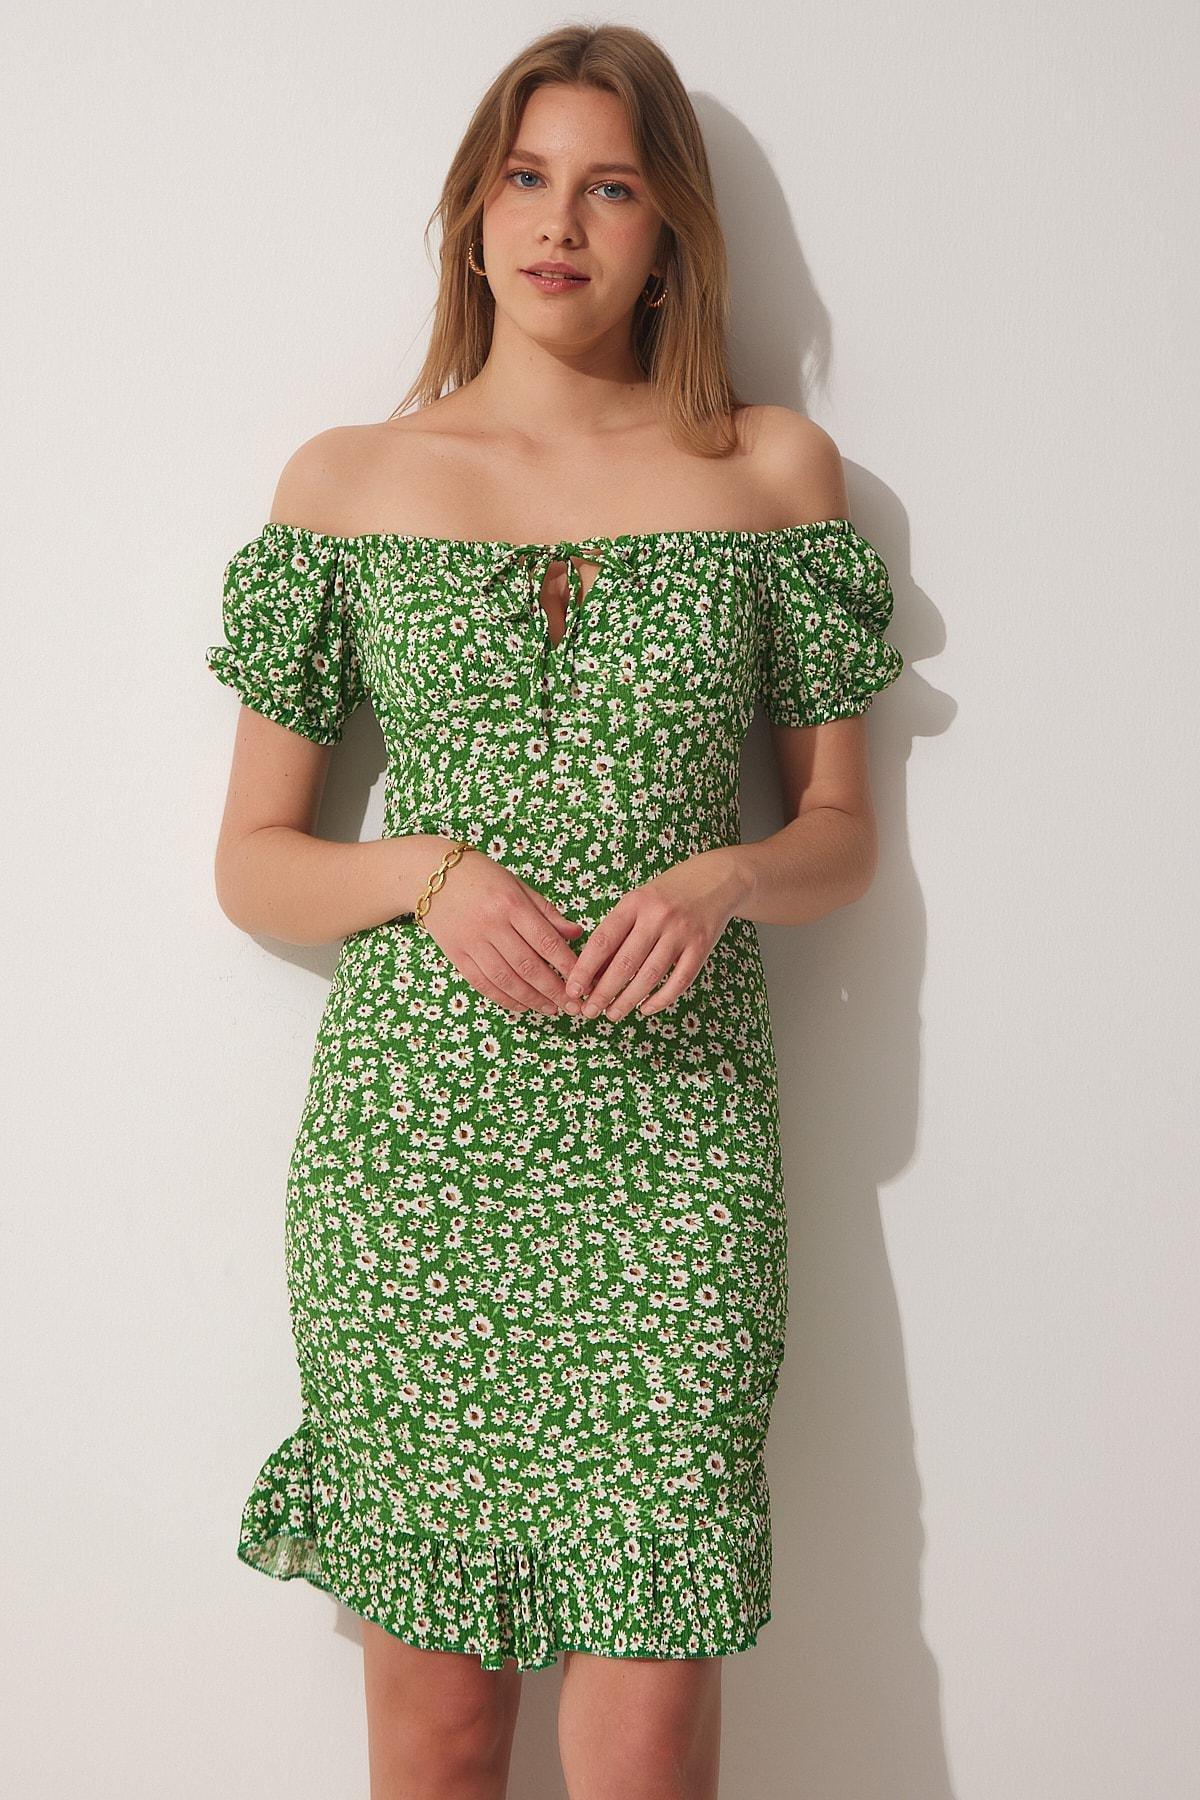 Happiness Istanbul - Green A-Line Dress